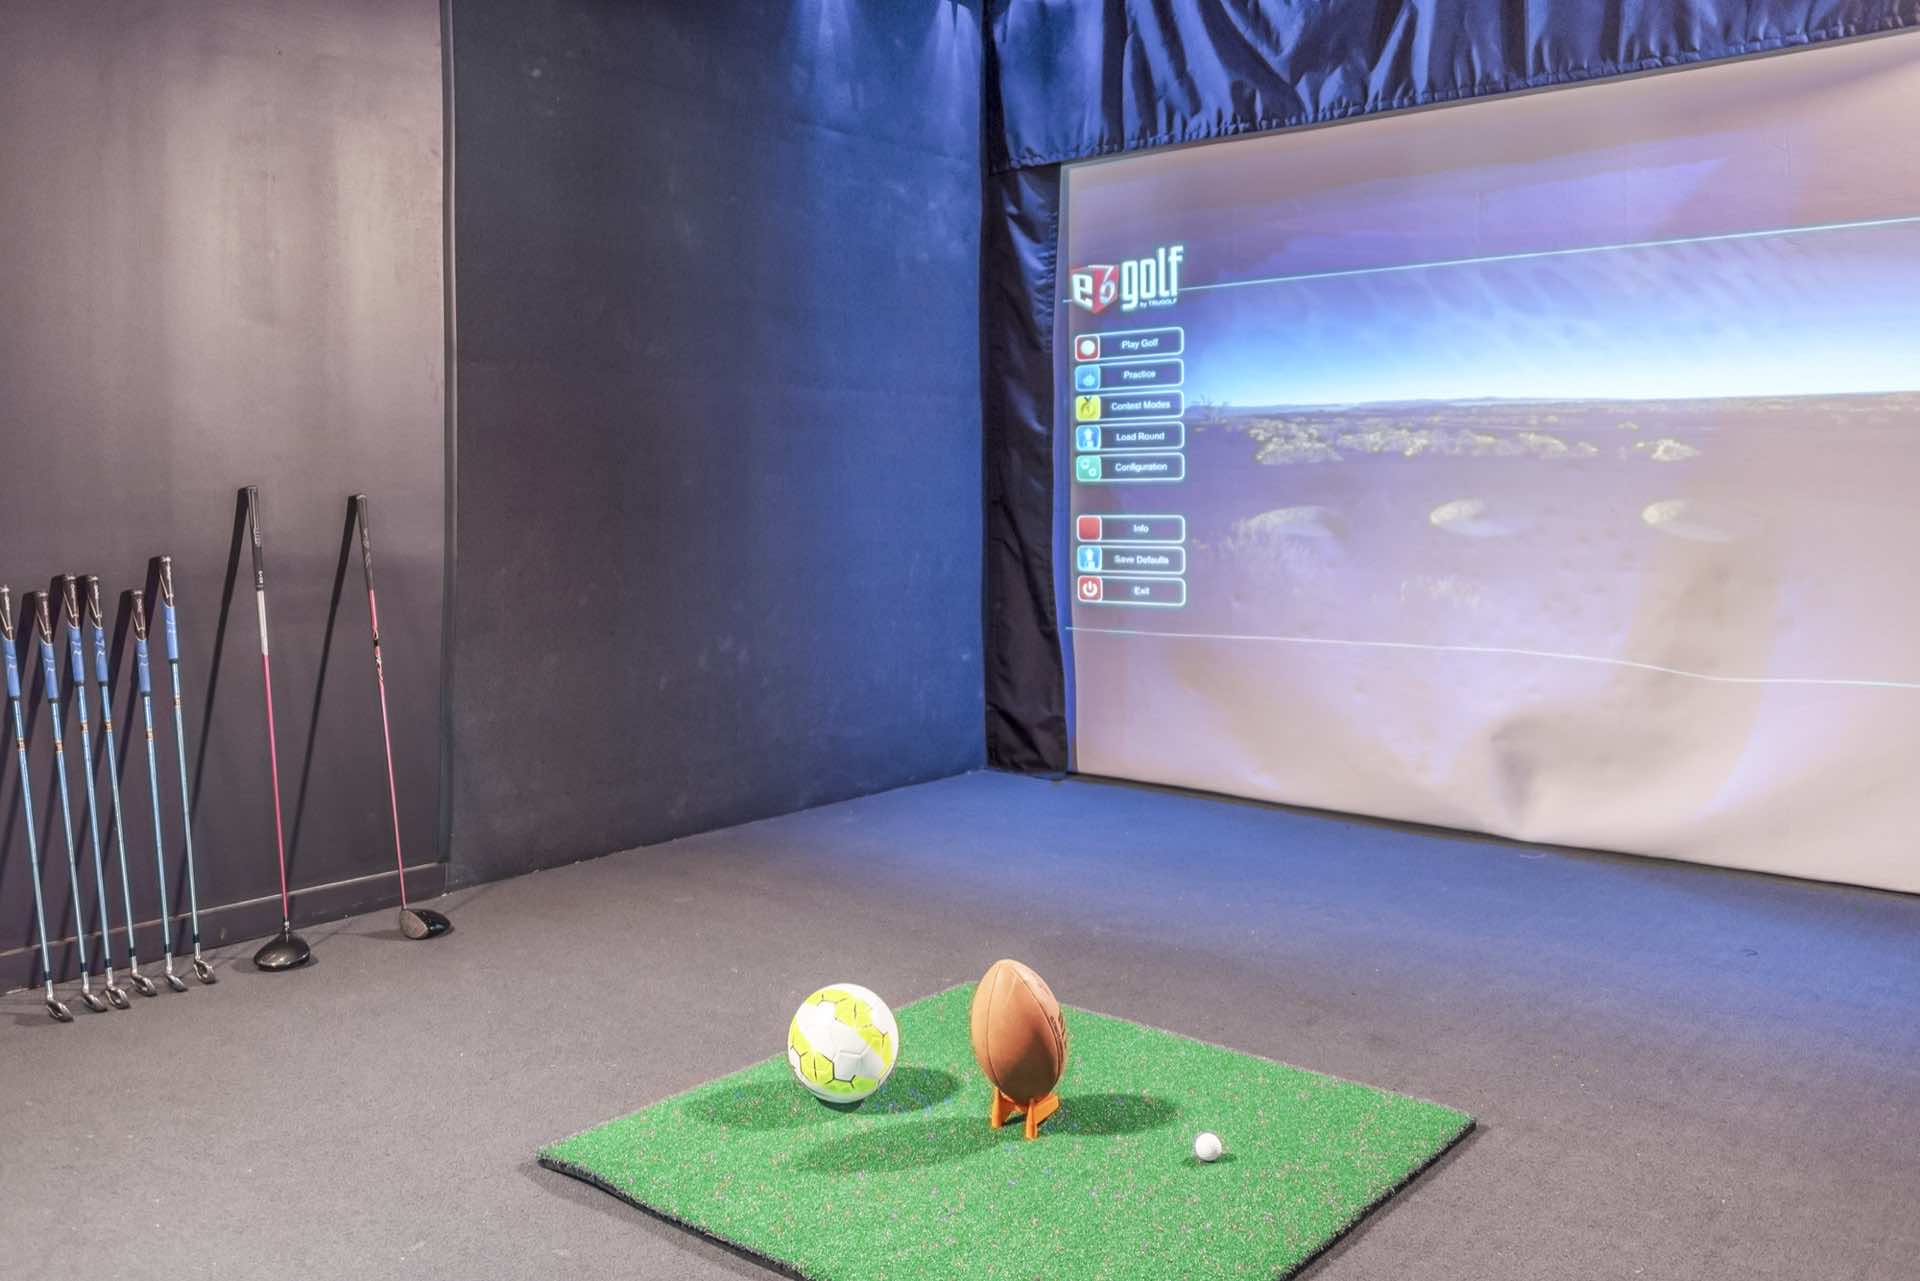 play golf, football or soccer in the sports simulation room